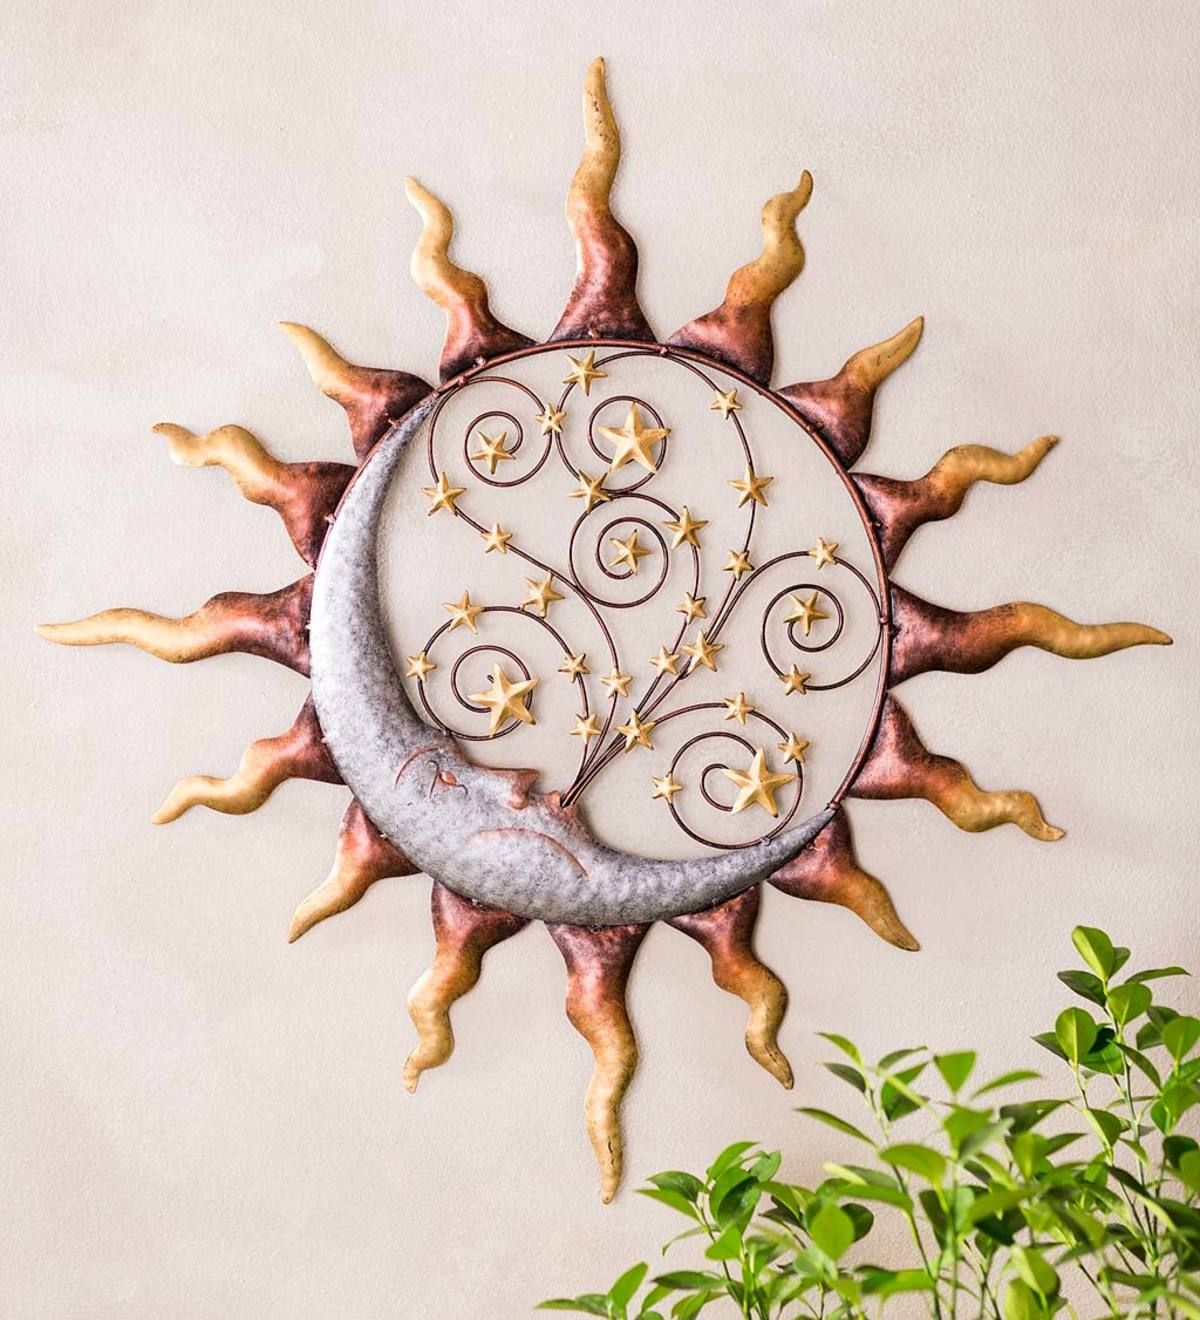 Handcrafted Metal Sun, Stars And Blowing Moon Wall Art | Wind And Weather Within The Sun Wall Art (View 14 of 15)